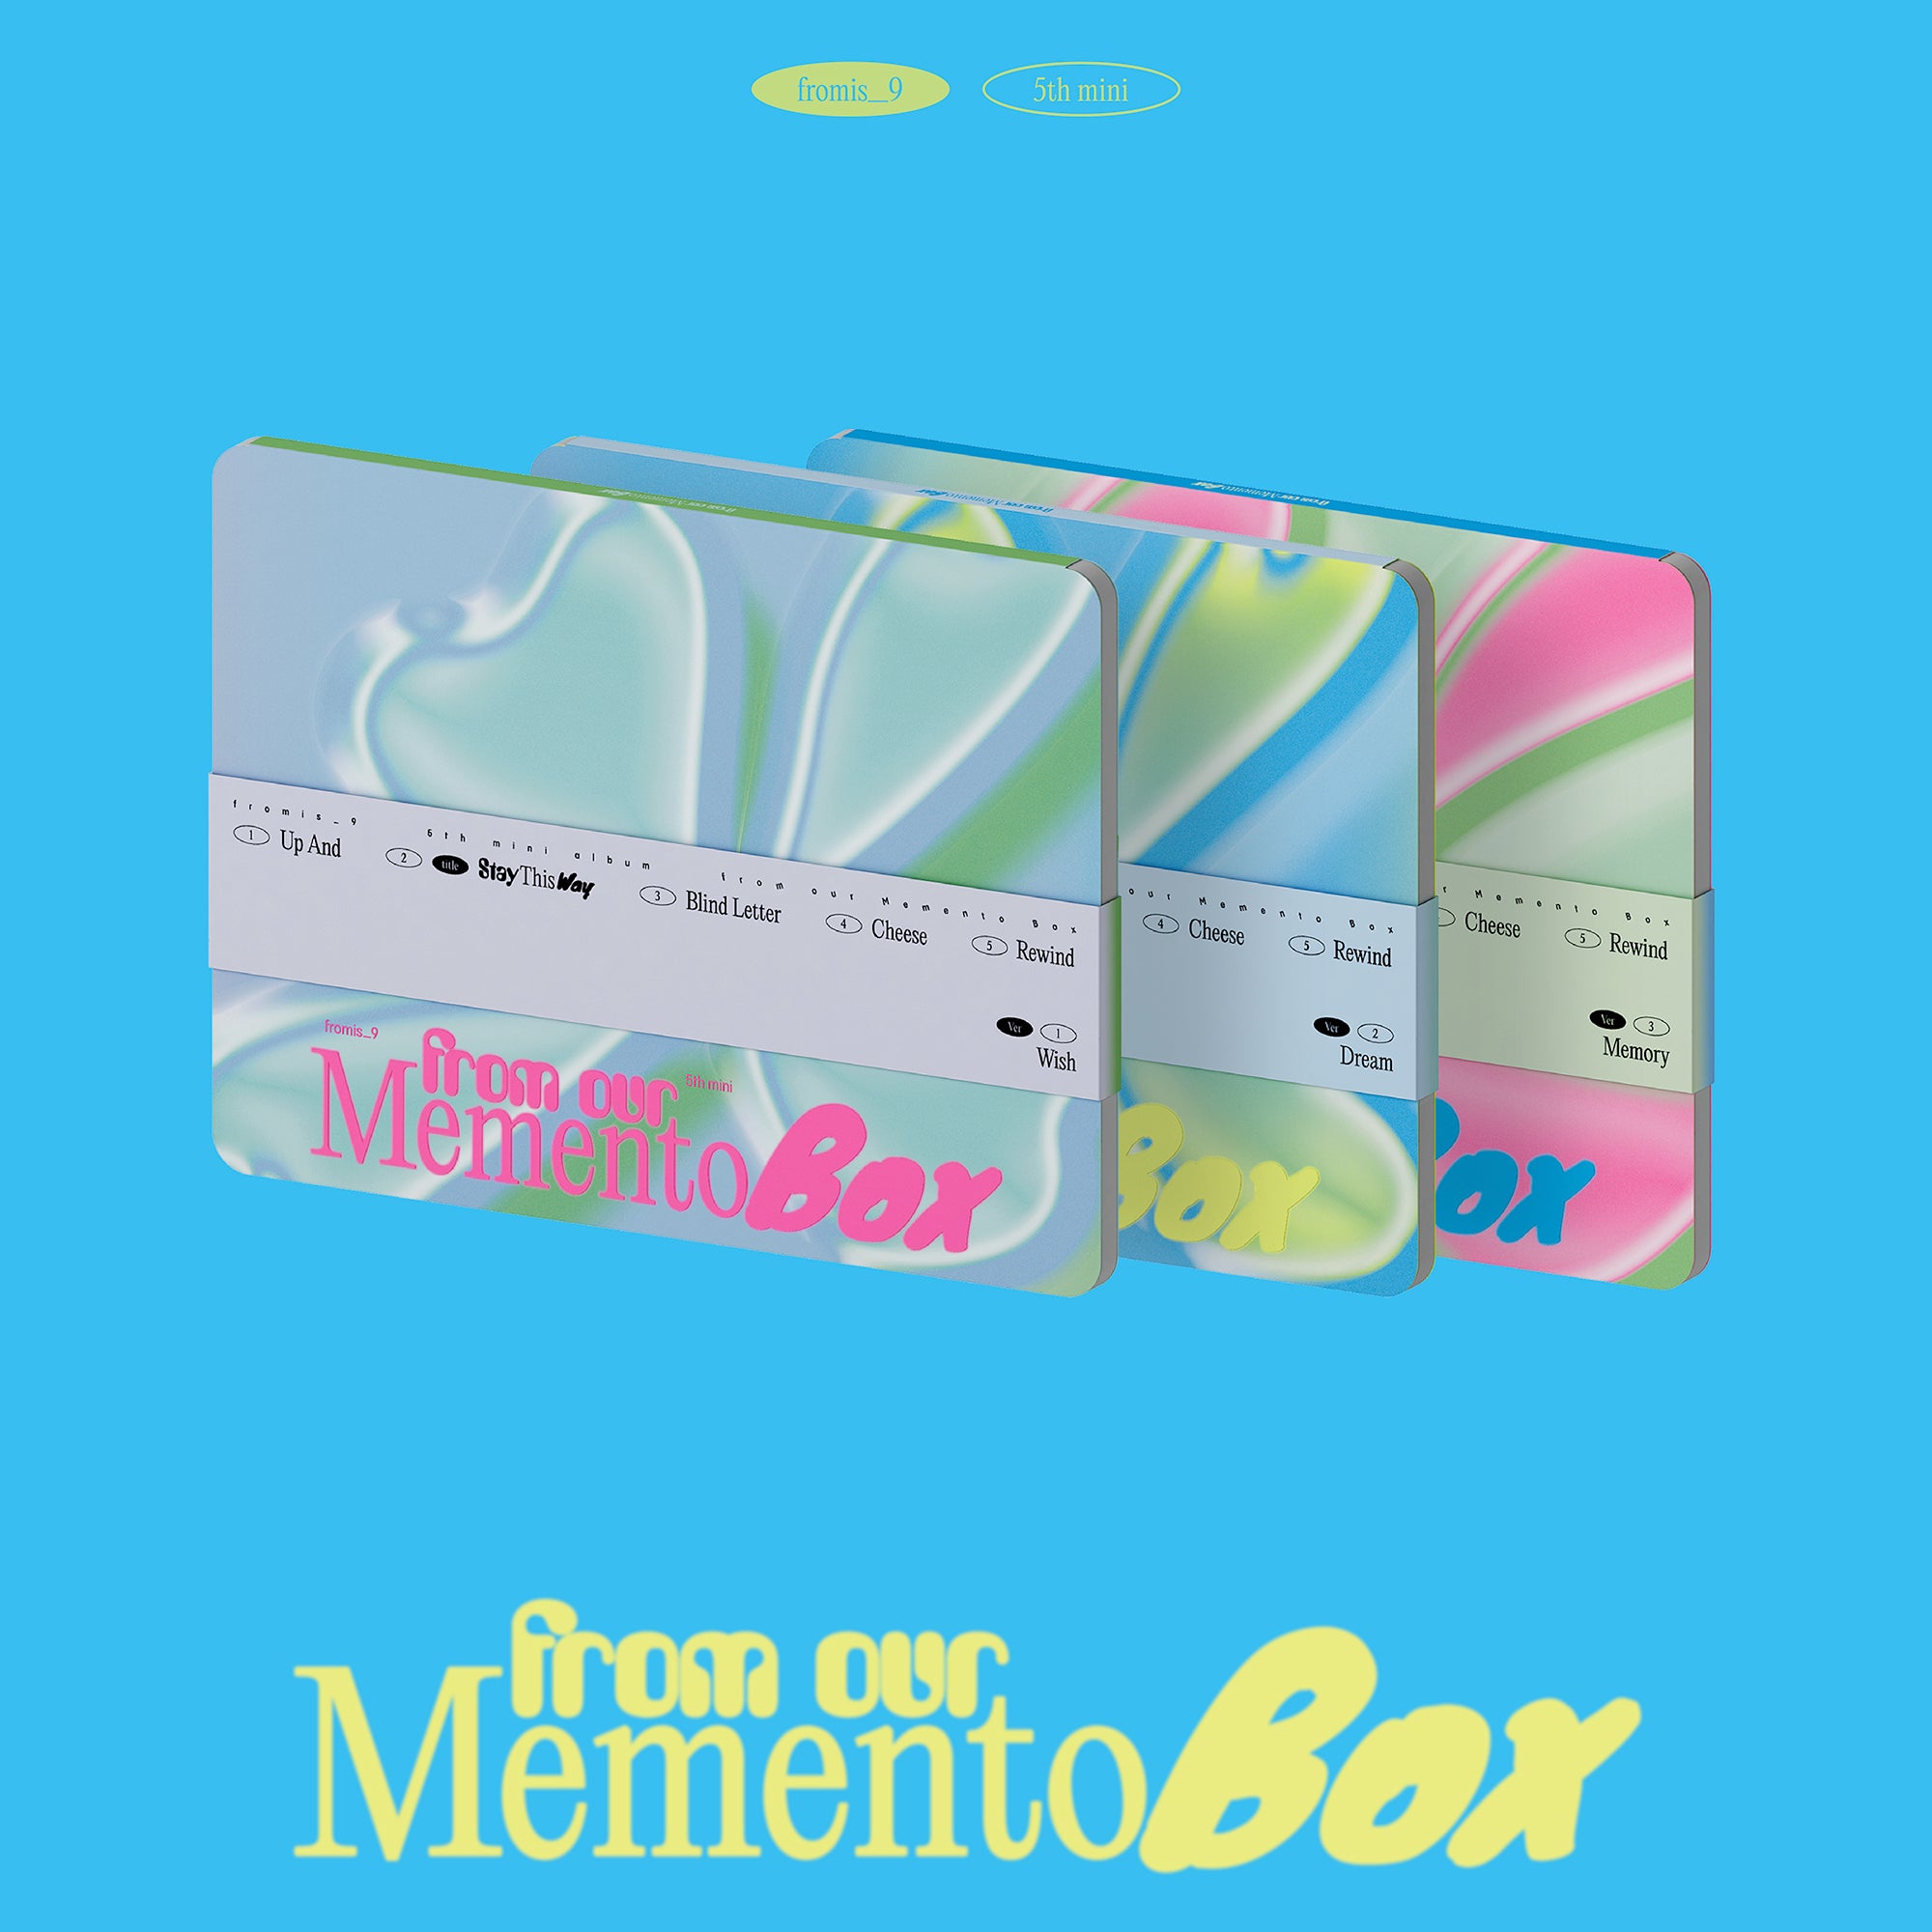 FROMIS_9 5TH MINI ALBUM 'FROM OUR MEMENTO BOX' COVER